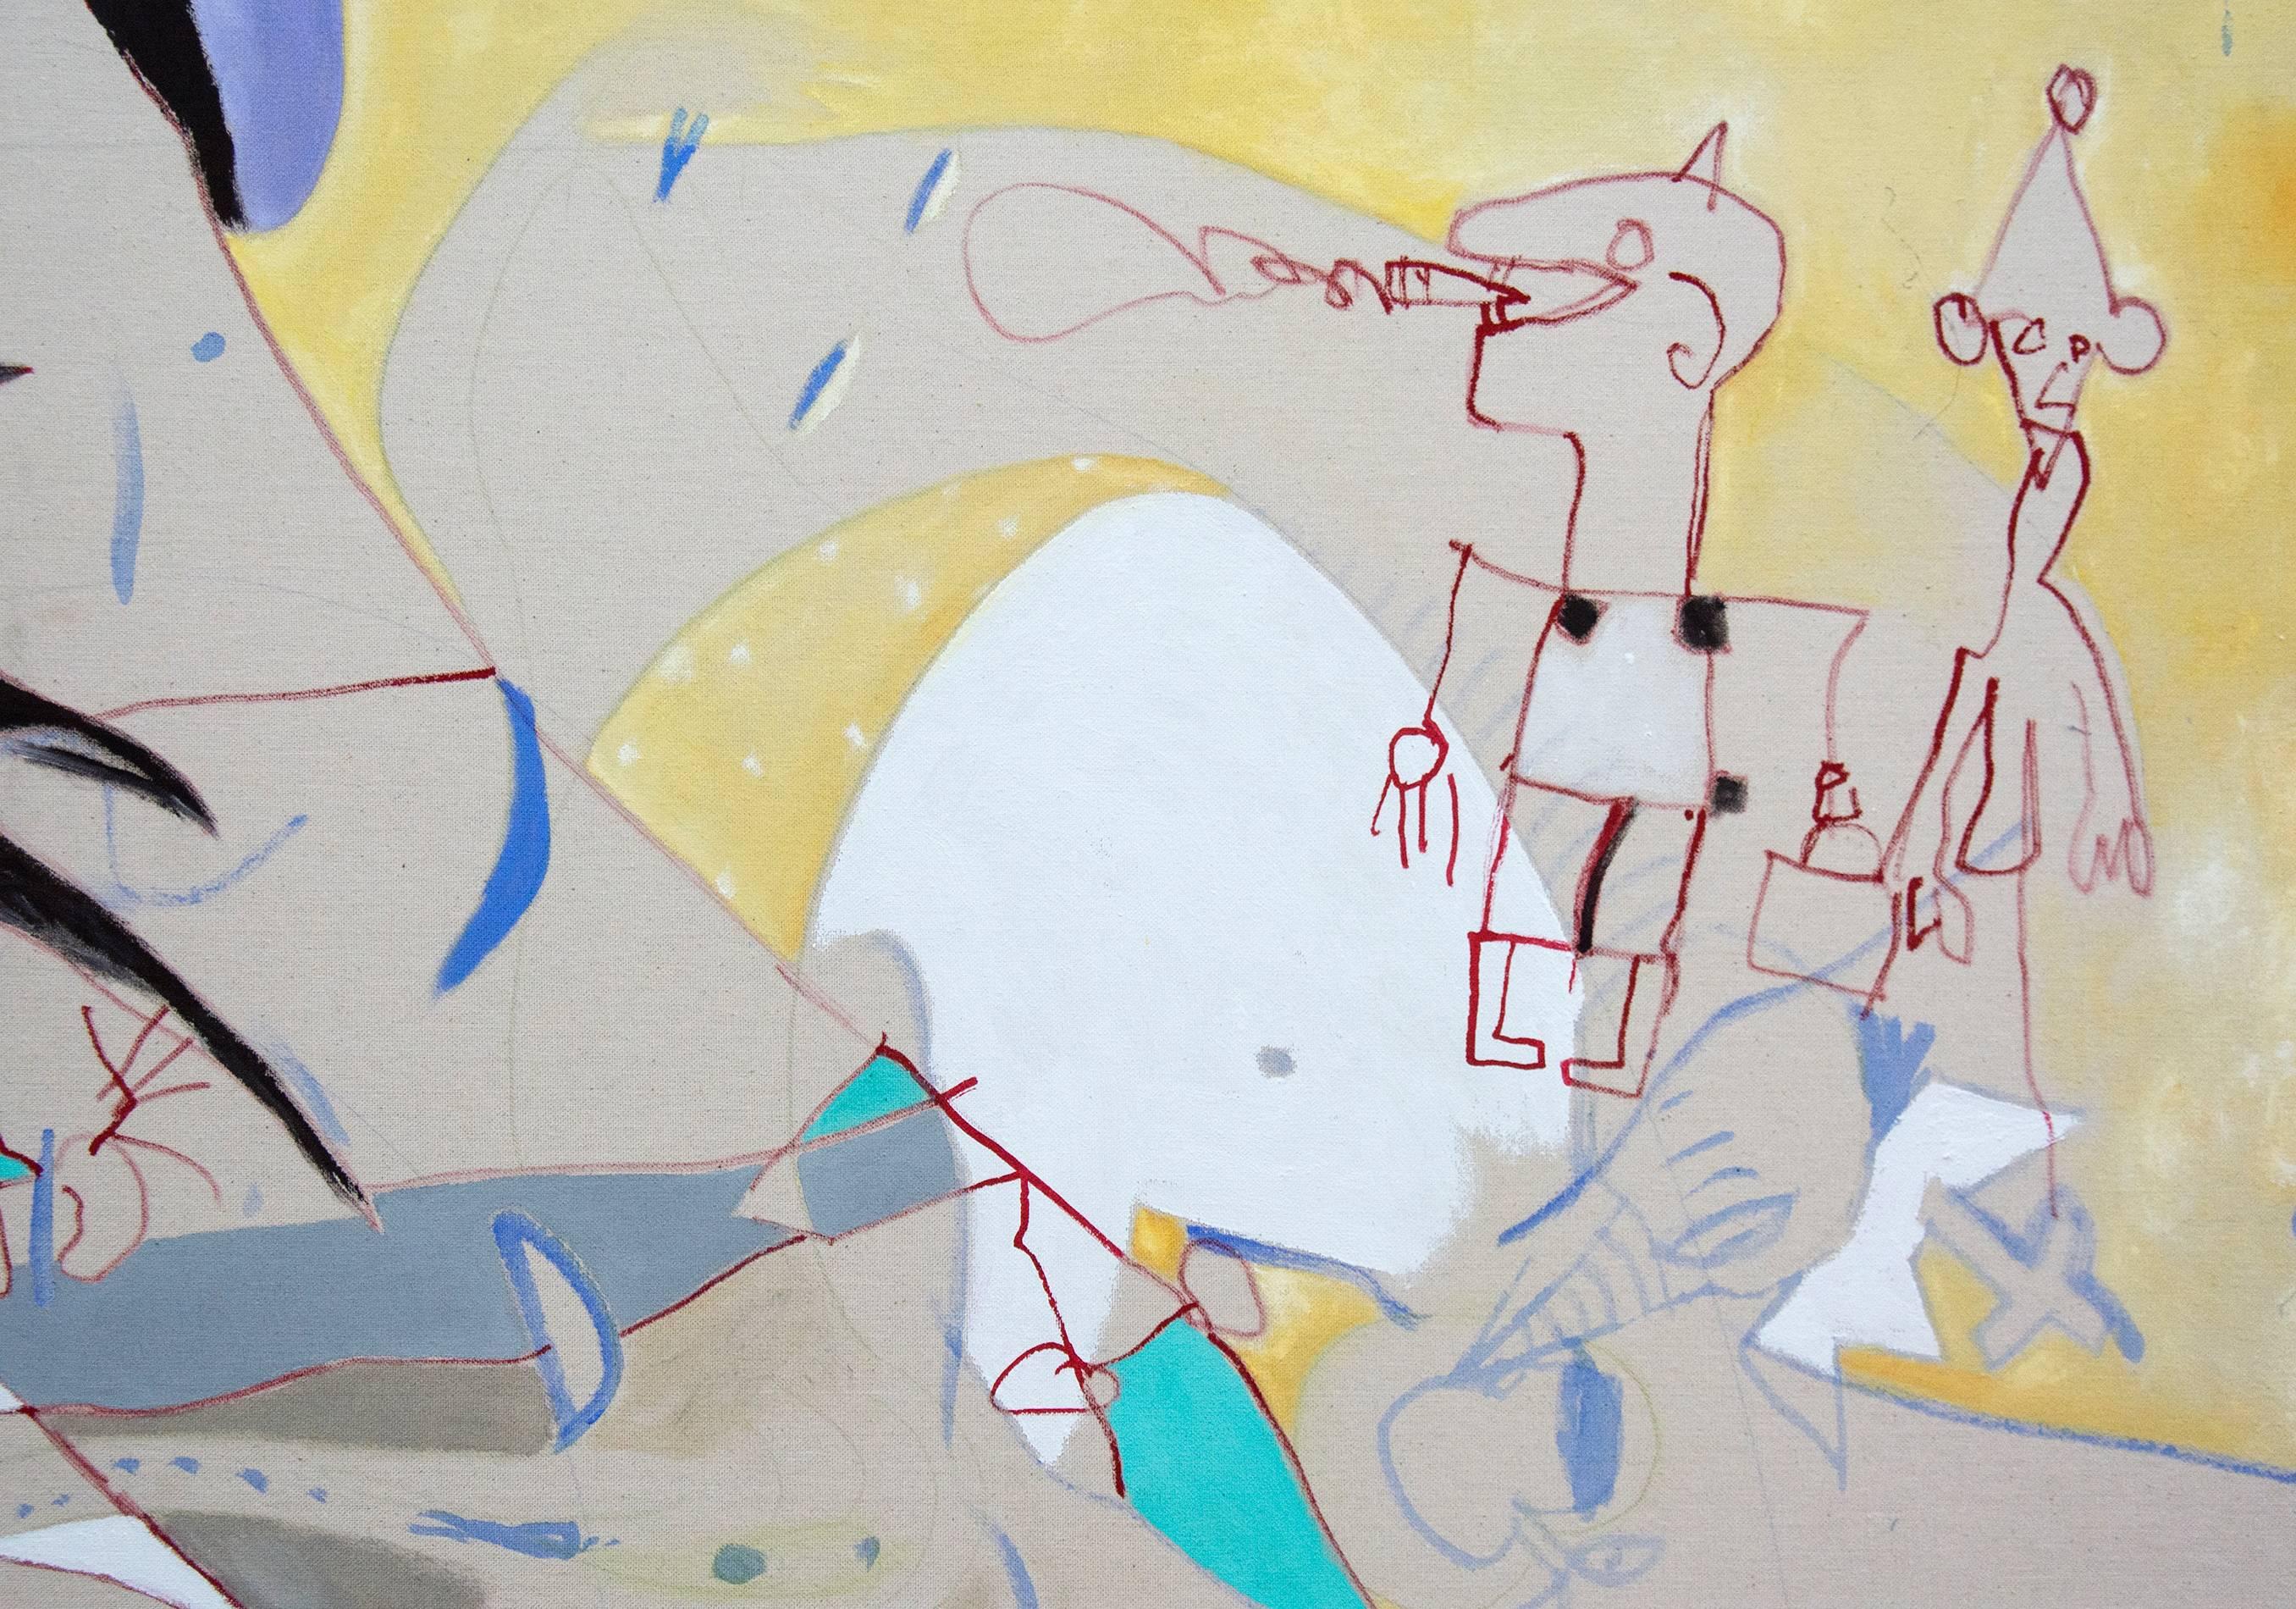 Arab Spring - large, dynamic, narrative, surrealist abstract, acrylic on canvas - Contemporary Painting by Gregor Hiltner